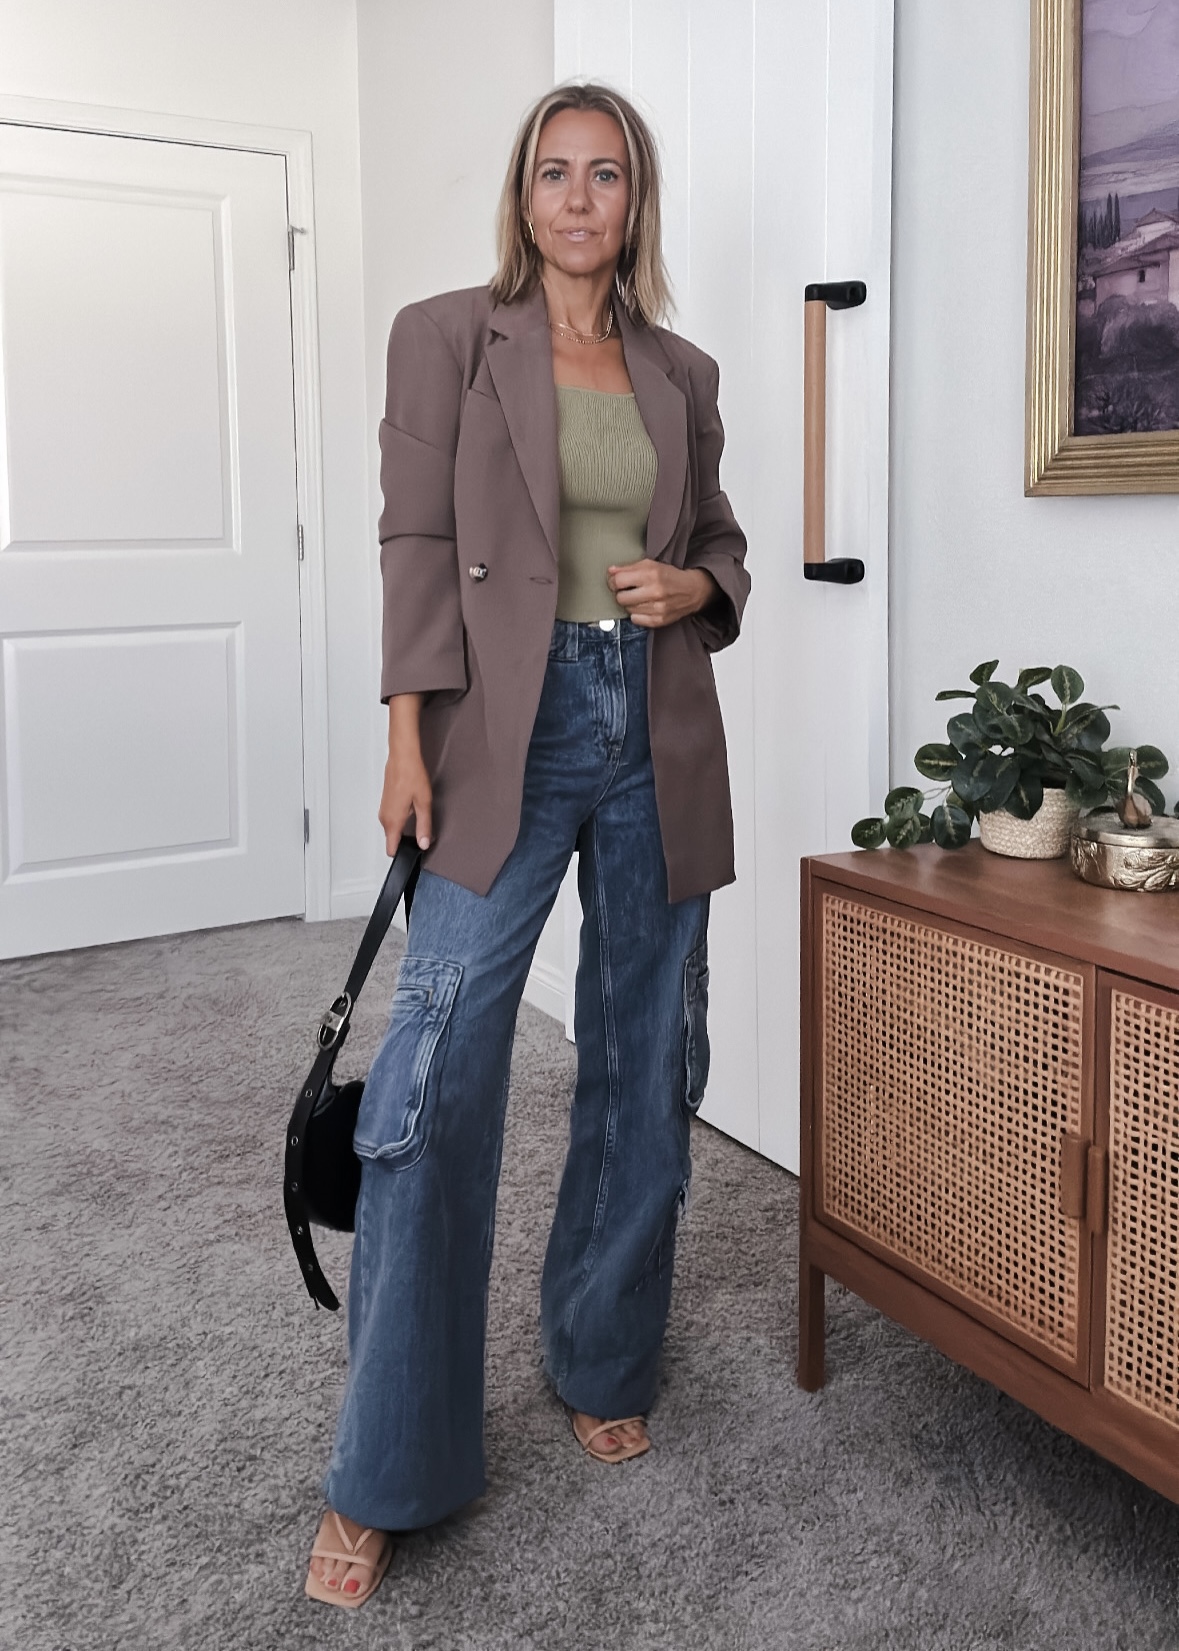 AMAZON FALL FASHION-Jaclyn De Leon style. Highlighting some of my favorite fall fashion finds.